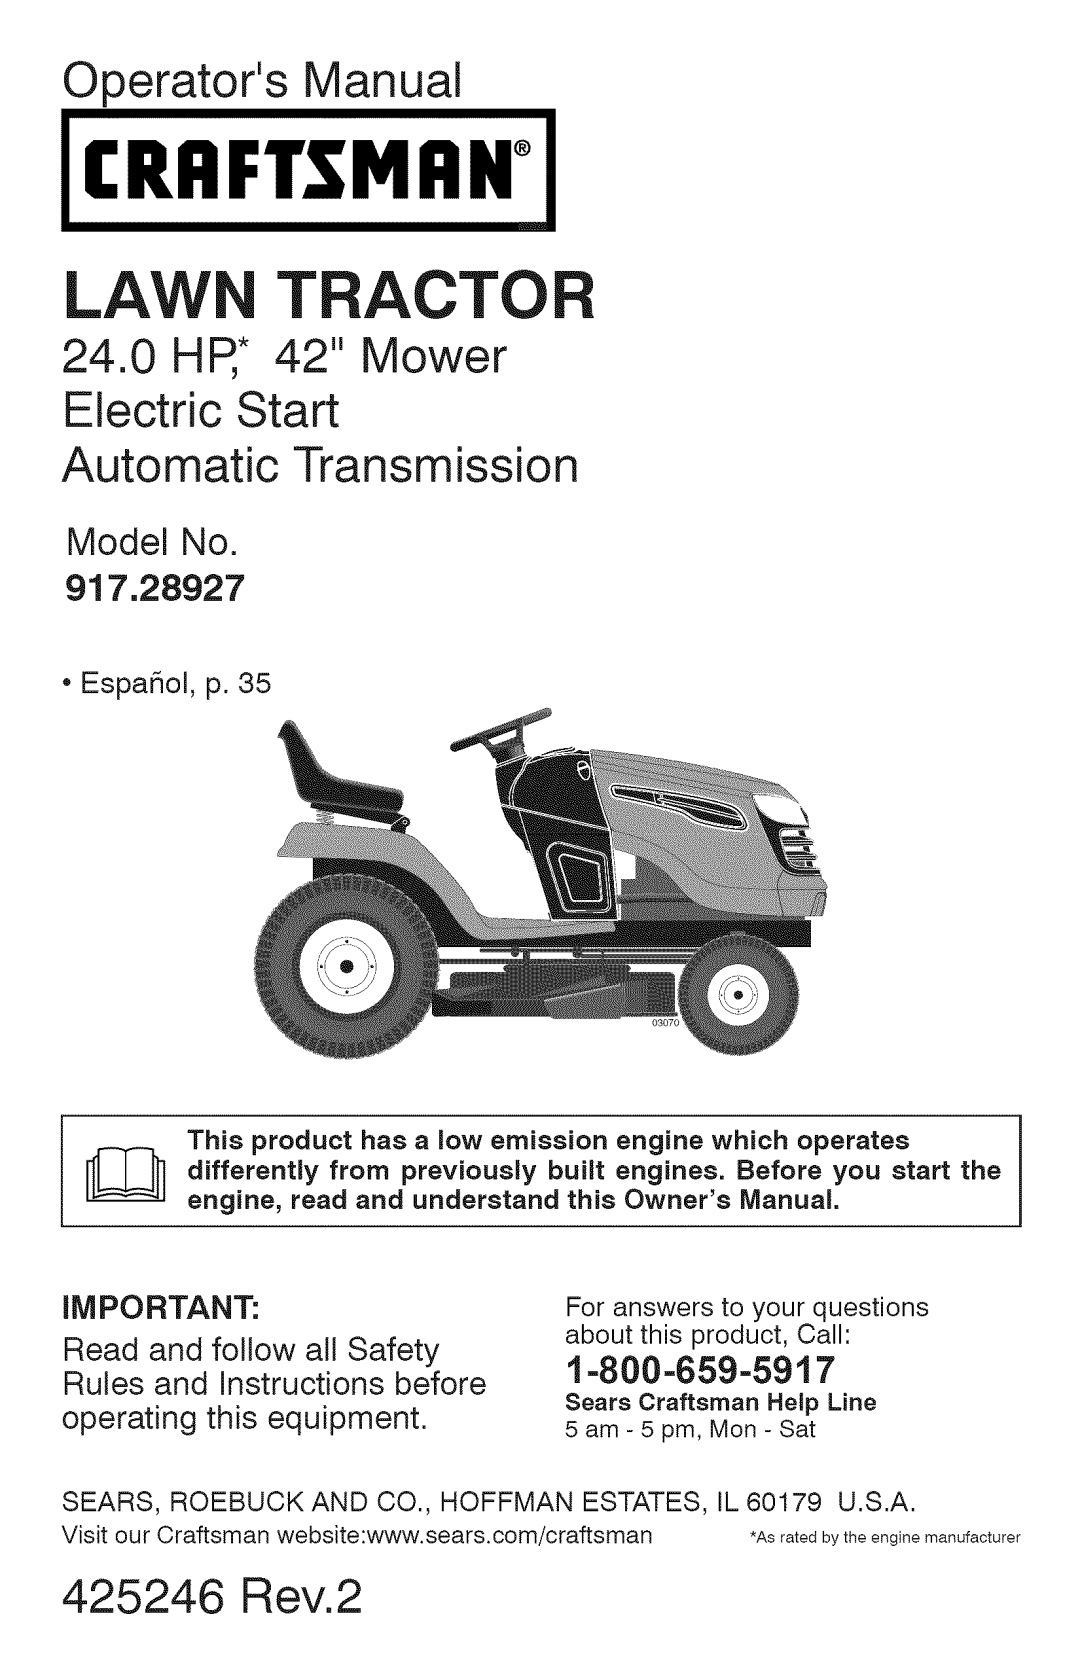 Craftsman 917.28927 manual 425246 Rev.2, Rrftsmrn, Law Tractor, Operators Manual, This product has a low emission 